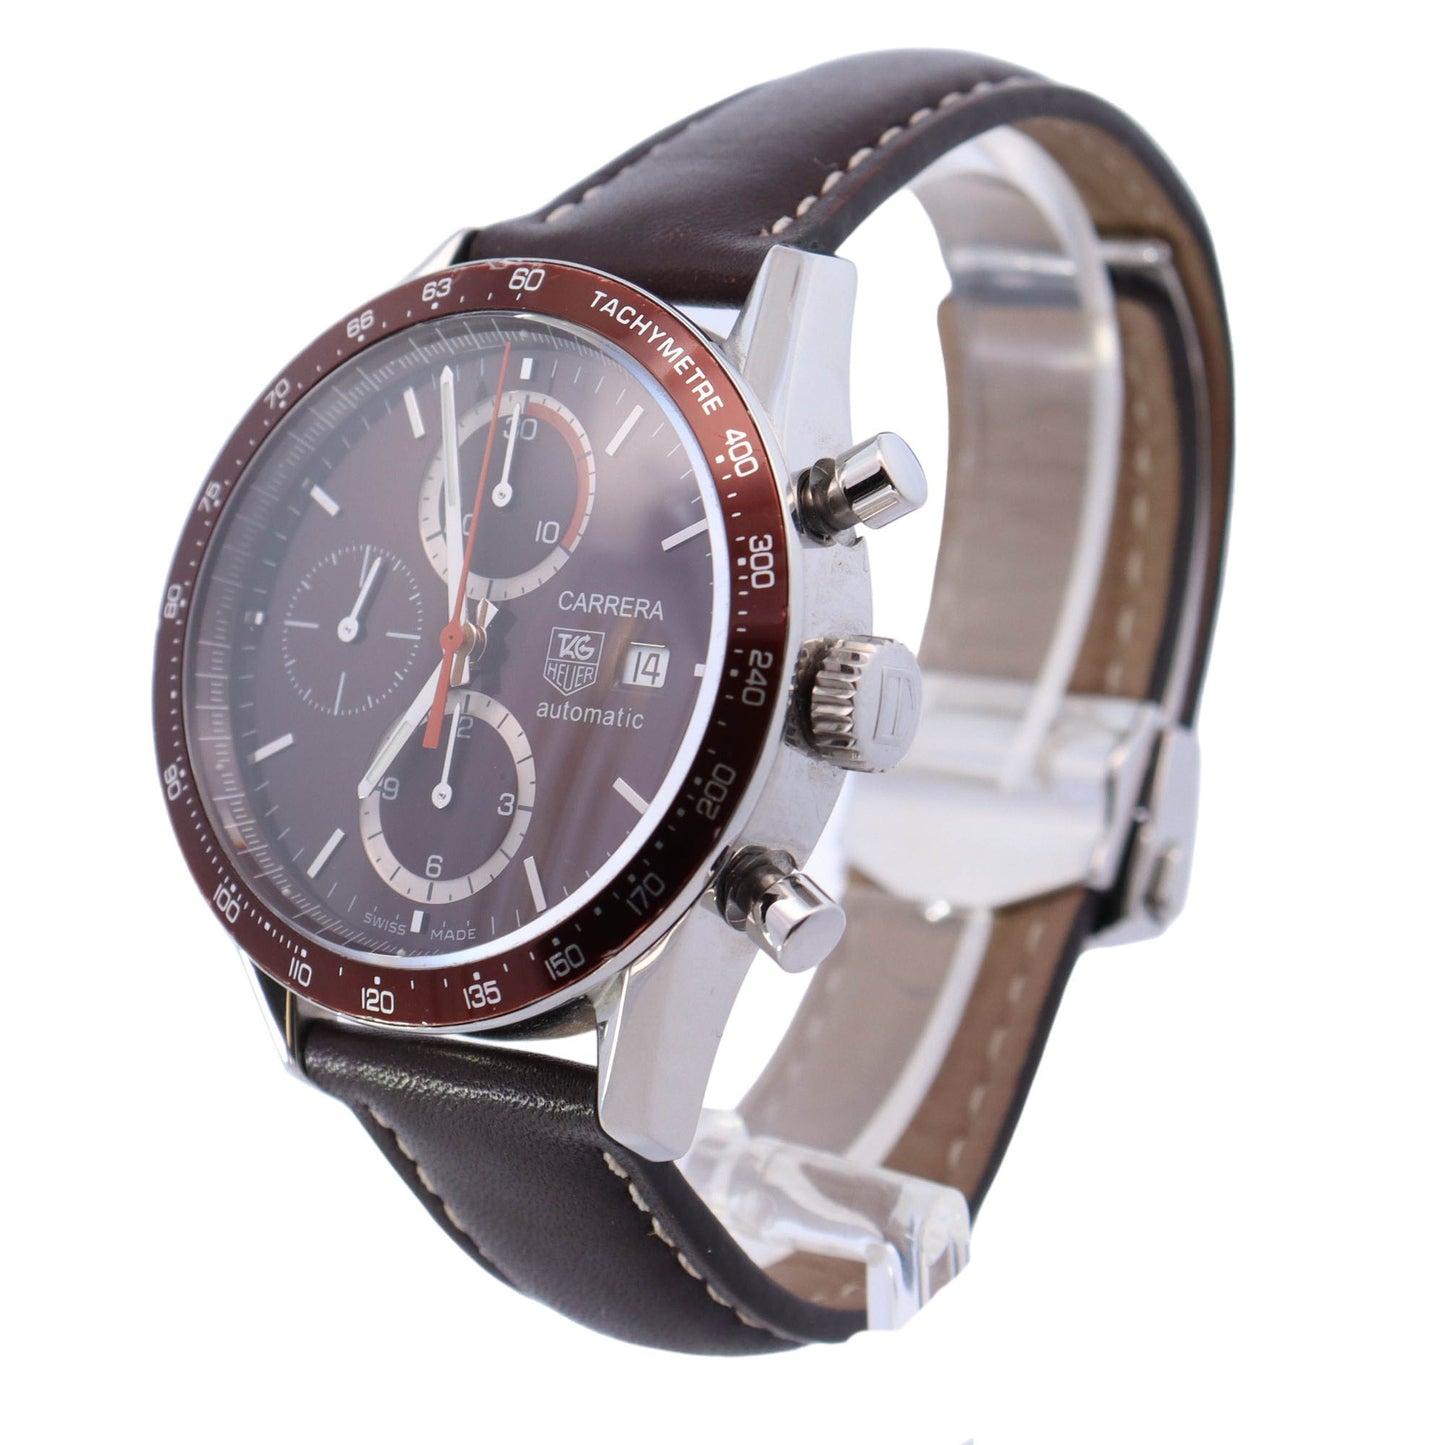 Tag Heuer Carerra Calibre 16 Stainless steel 41mm Brown Chronograph Stick Dial Watch Reference #: CV2013-0